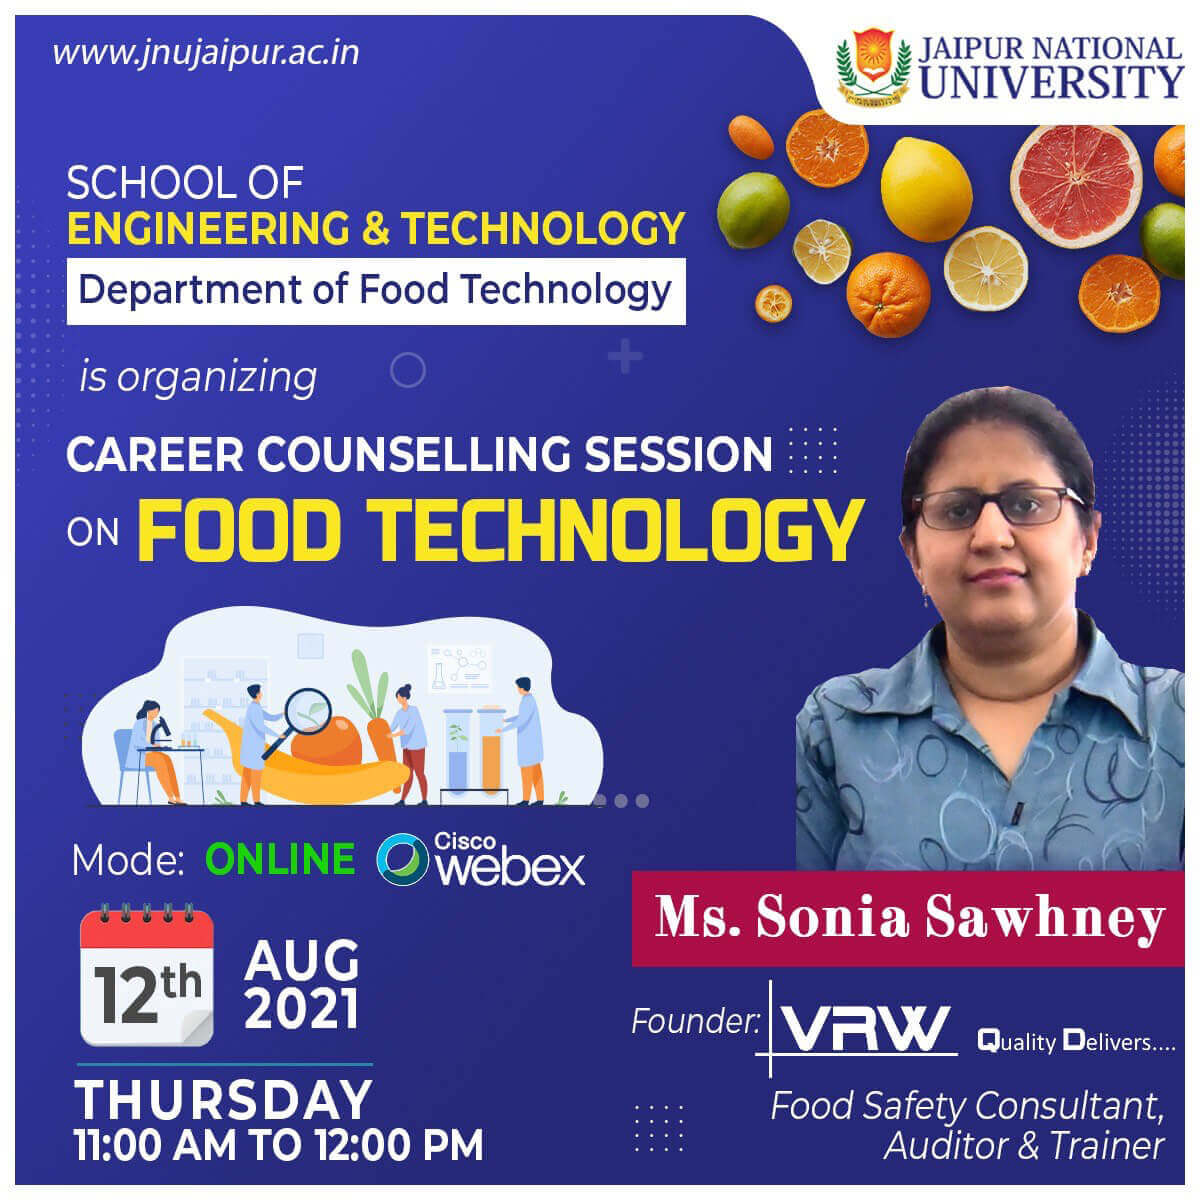 Career Counselling Session on Food Technology